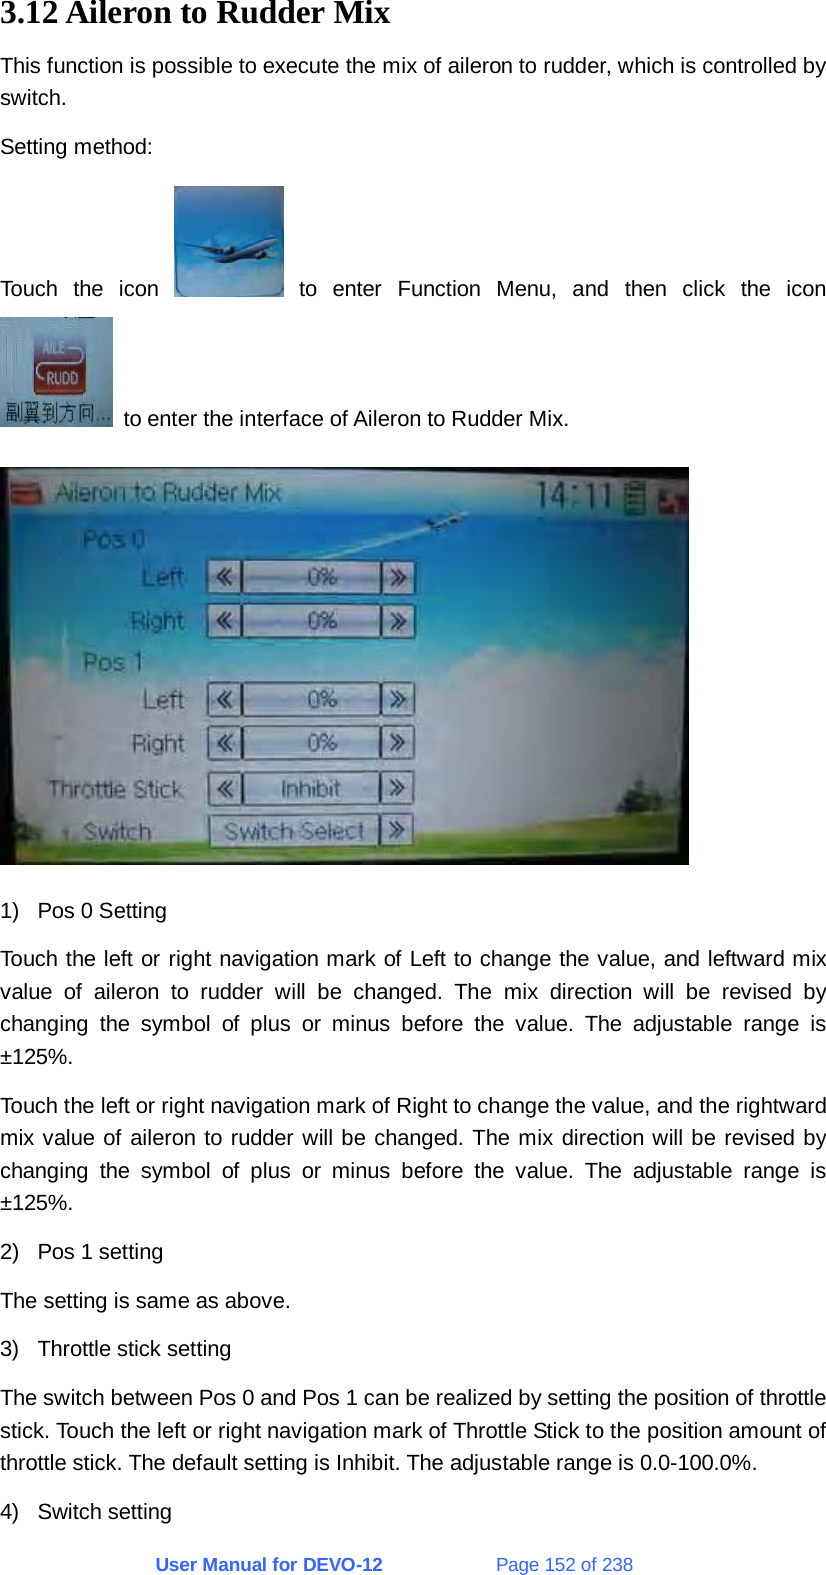 User Manual for DEVO-12             Page 152 of 238 3.12 Aileron to Rudder Mix This function is possible to execute the mix of aileron to rudder, which is controlled by switch. Setting method: Touch the icon   to enter Function Menu, and then click the icon   to enter the interface of Aileron to Rudder Mix.  1)  Pos 0 Setting Touch the left or right navigation mark of Left to change the value, and leftward mix value of aileron to rudder will be changed. The mix direction will be revised by changing the symbol of plus or minus before the value. The adjustable range is ±125%. Touch the left or right navigation mark of Right to change the value, and the rightward mix value of aileron to rudder will be changed. The mix direction will be revised by changing the symbol of plus or minus before the value. The adjustable range is ±125%. 2)  Pos 1 setting The setting is same as above. 3)  Throttle stick setting The switch between Pos 0 and Pos 1 can be realized by setting the position of throttle stick. Touch the left or right navigation mark of Throttle Stick to the position amount of throttle stick. The default setting is Inhibit. The adjustable range is 0.0-100.0%. 4) Switch setting 